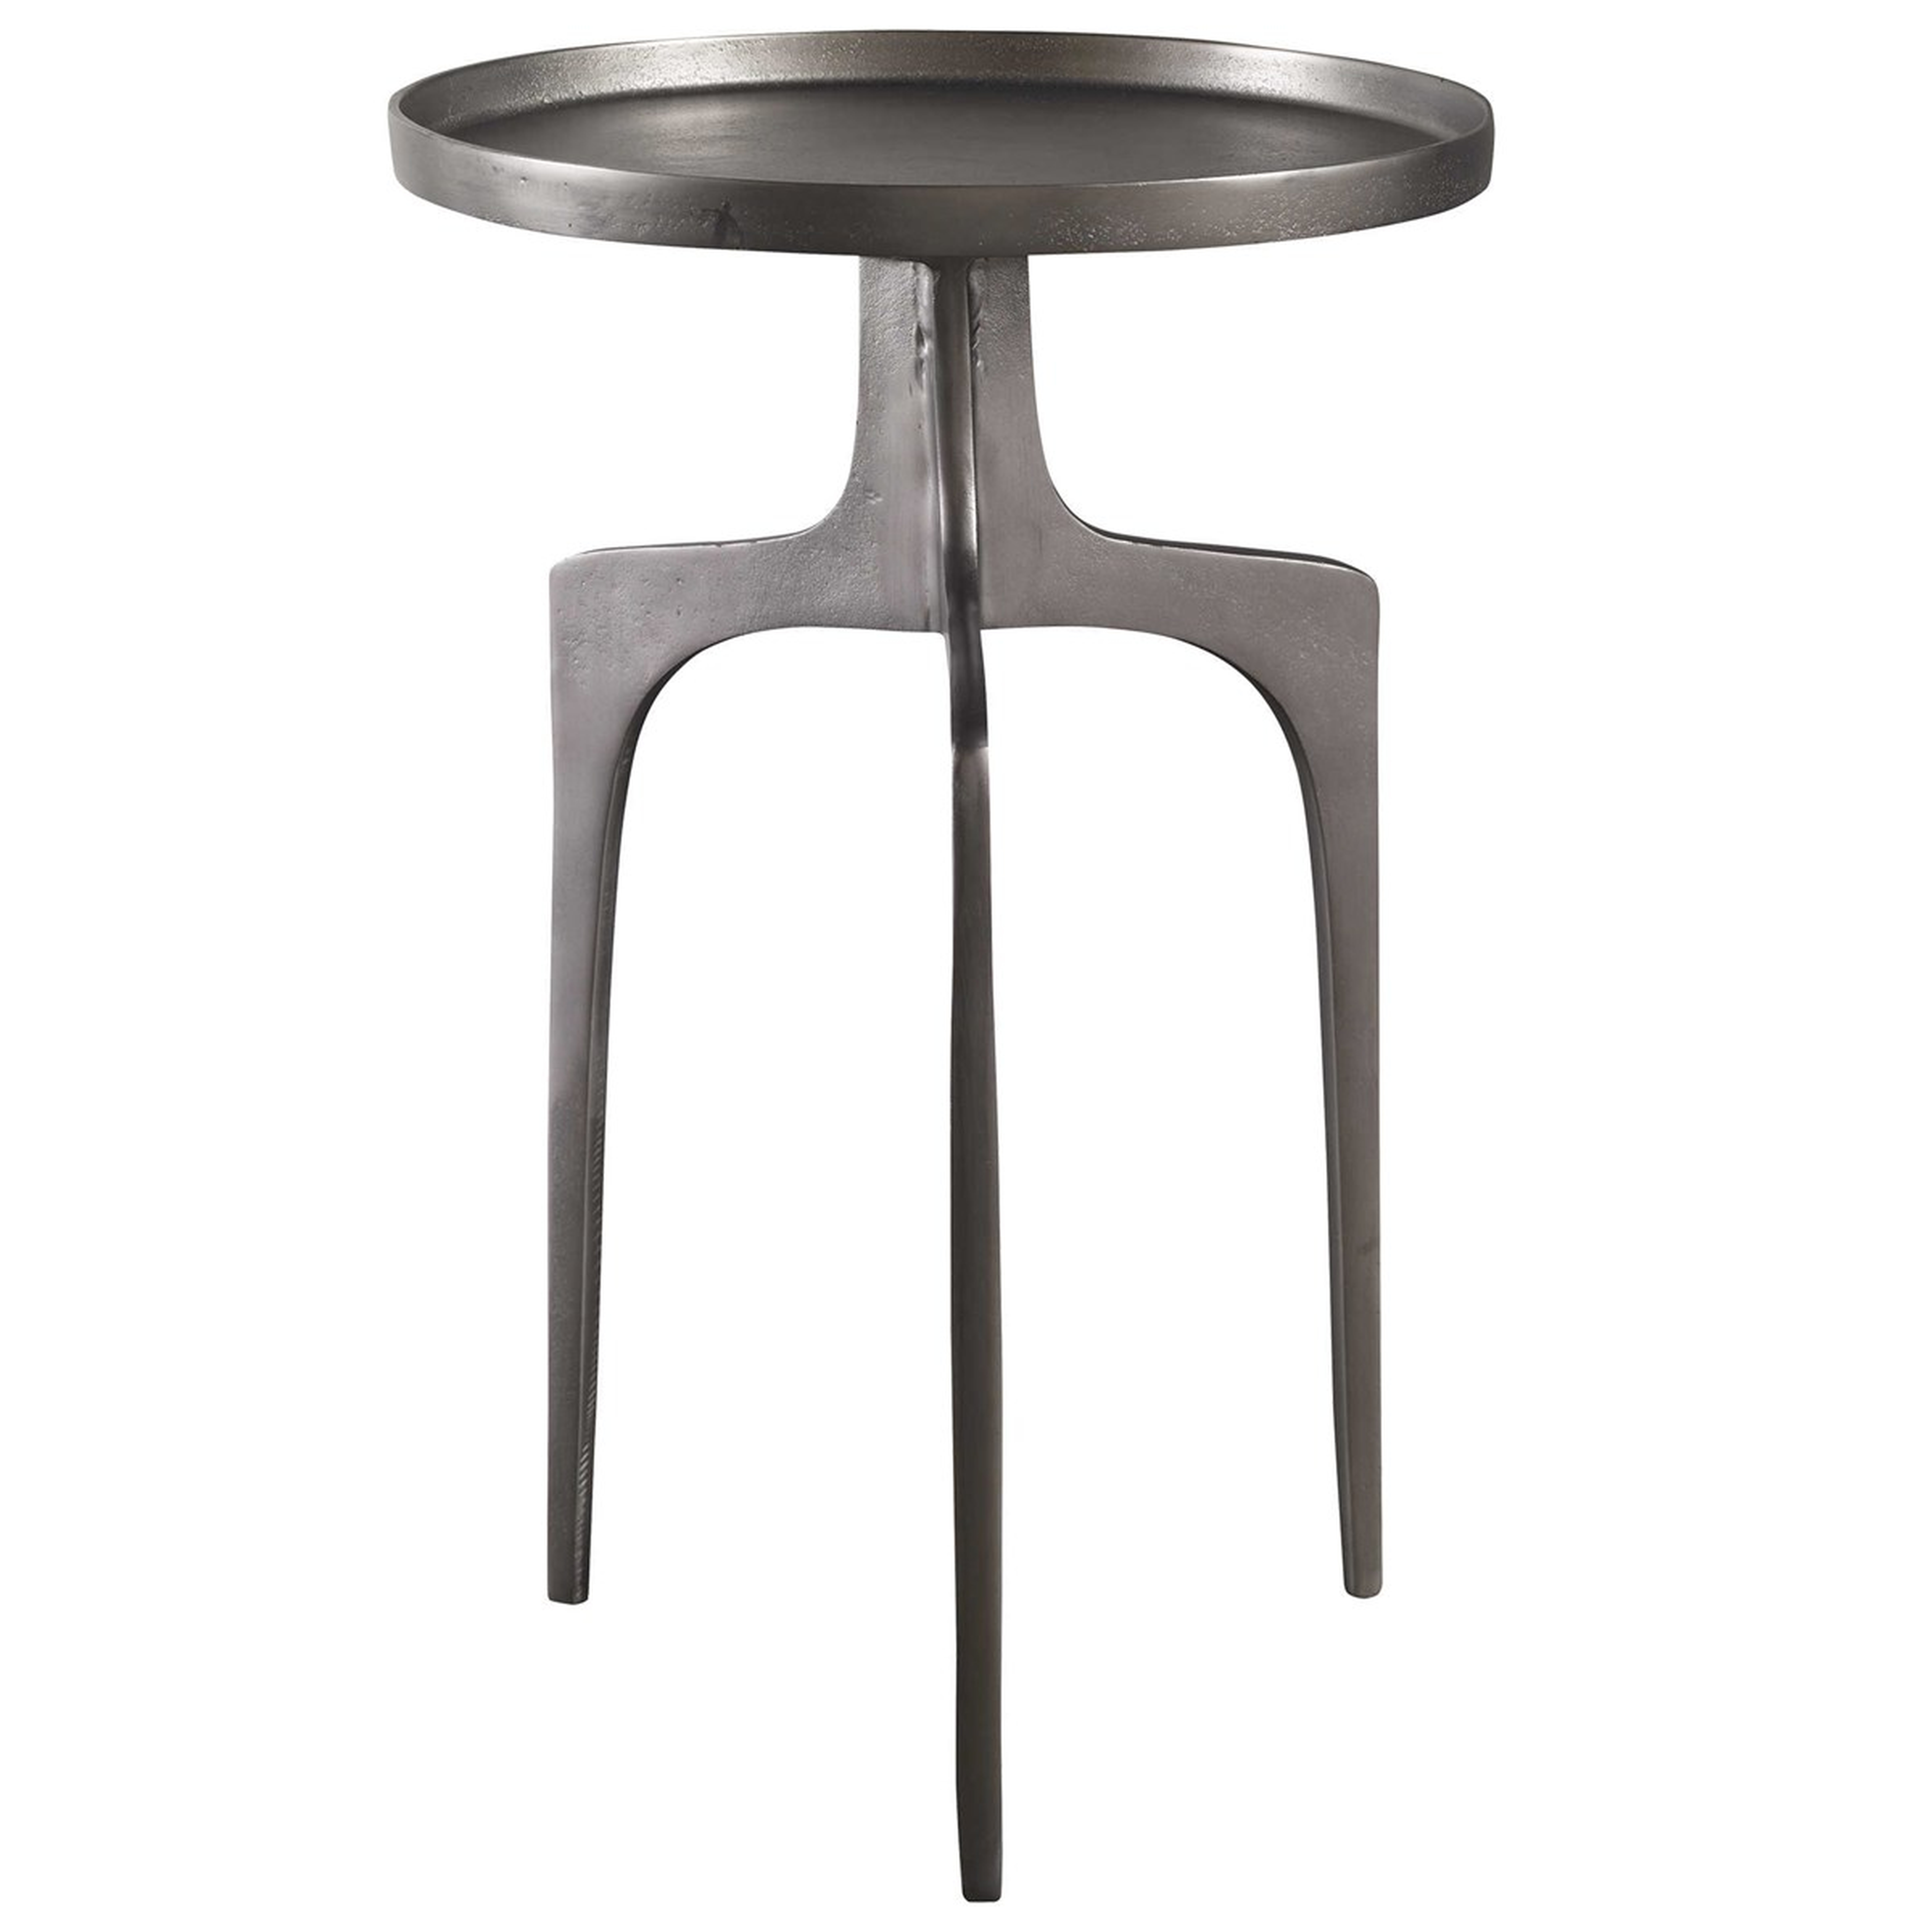 Kenna Nickel Accent Table - Hudsonhill Foundry